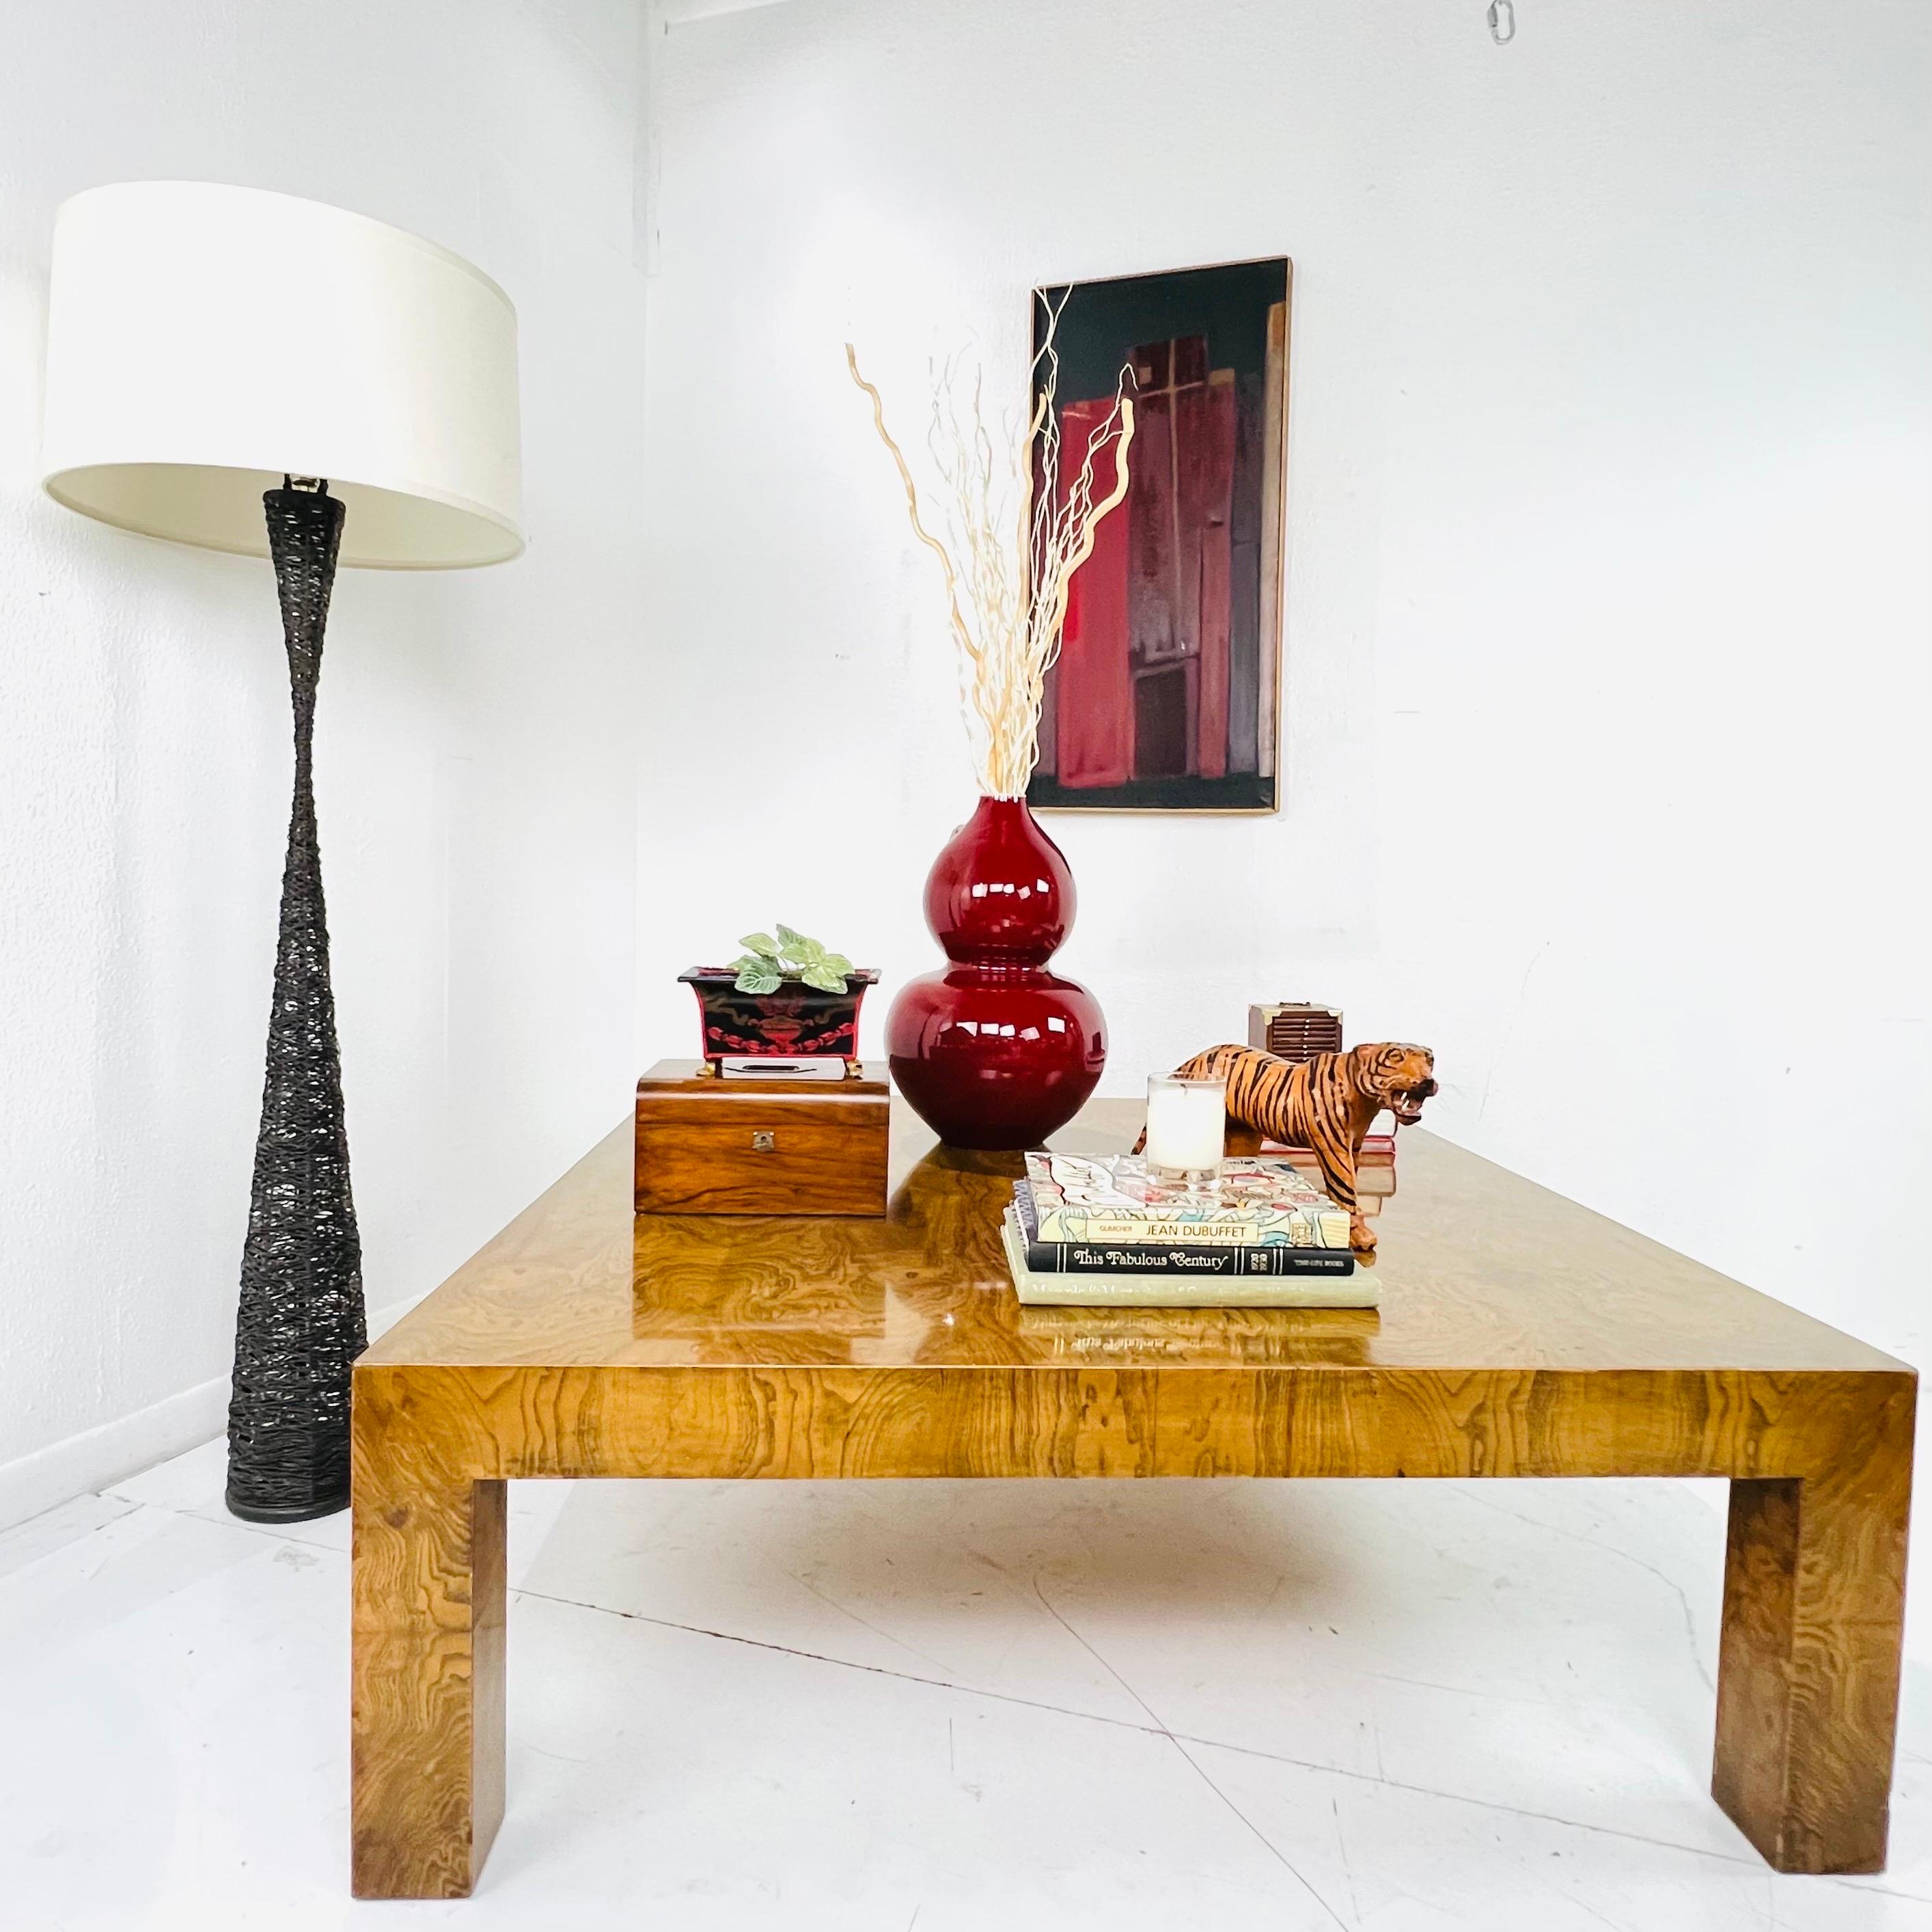 Large scale 1970s burlwood coffee table designed by Milo Baughman. Great proportions and a very timeless design. Great details like the thick and rich veneer. Table is sturdy and in good vintage condition with some minor cosmetic imperfections